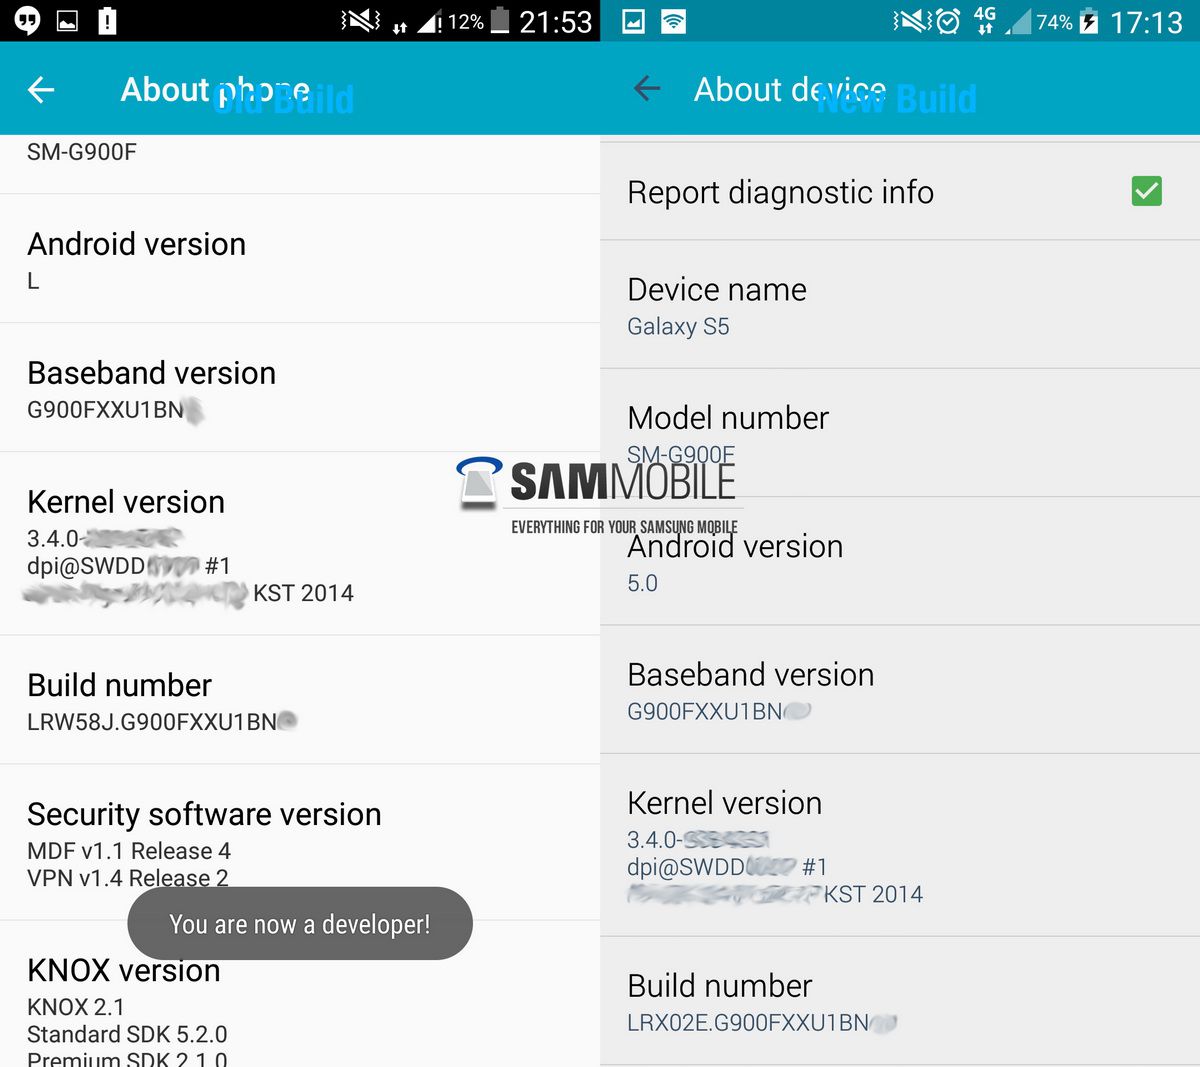 samsung-galaxy-s5-android-5.0-11